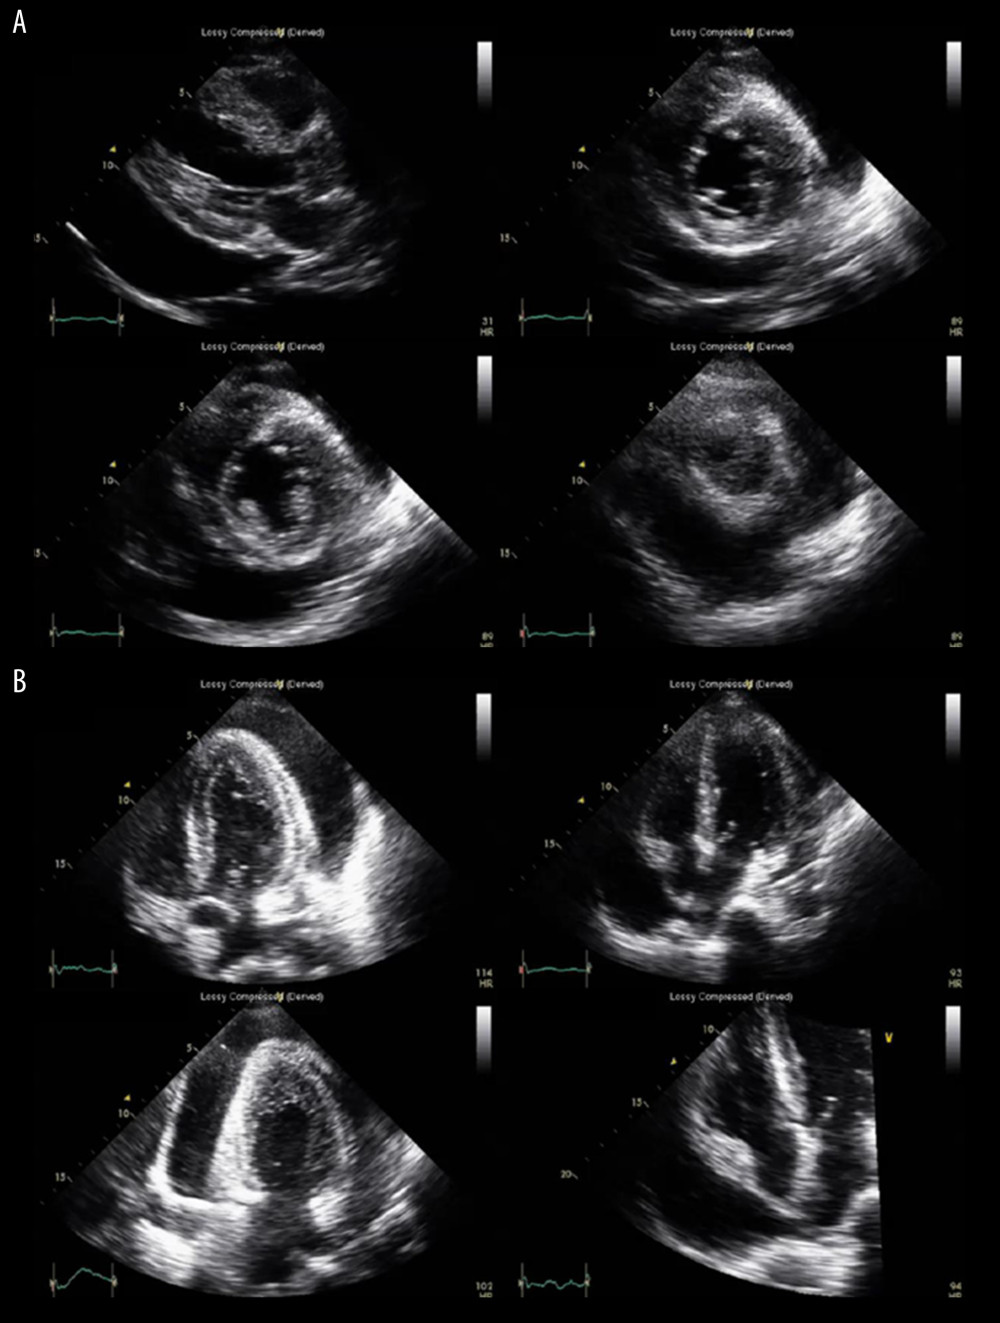 Pre-pericardiocentesis echocardiographic findings. Transthoracic echocardiography showed a circumferential large amount of pericardial effusion (maximal thickness, about 30 mm at the posterior side of the ventricular wall) with slight compression of the right atrium and right ventricle. Left ventricular systolic function was preserved. (A) A large amount of pericardial effusion was observed on the parasternal long-axis view and parasternal short-axis views. (B) A large amount of pericardial effusion was also observed in various apical views.